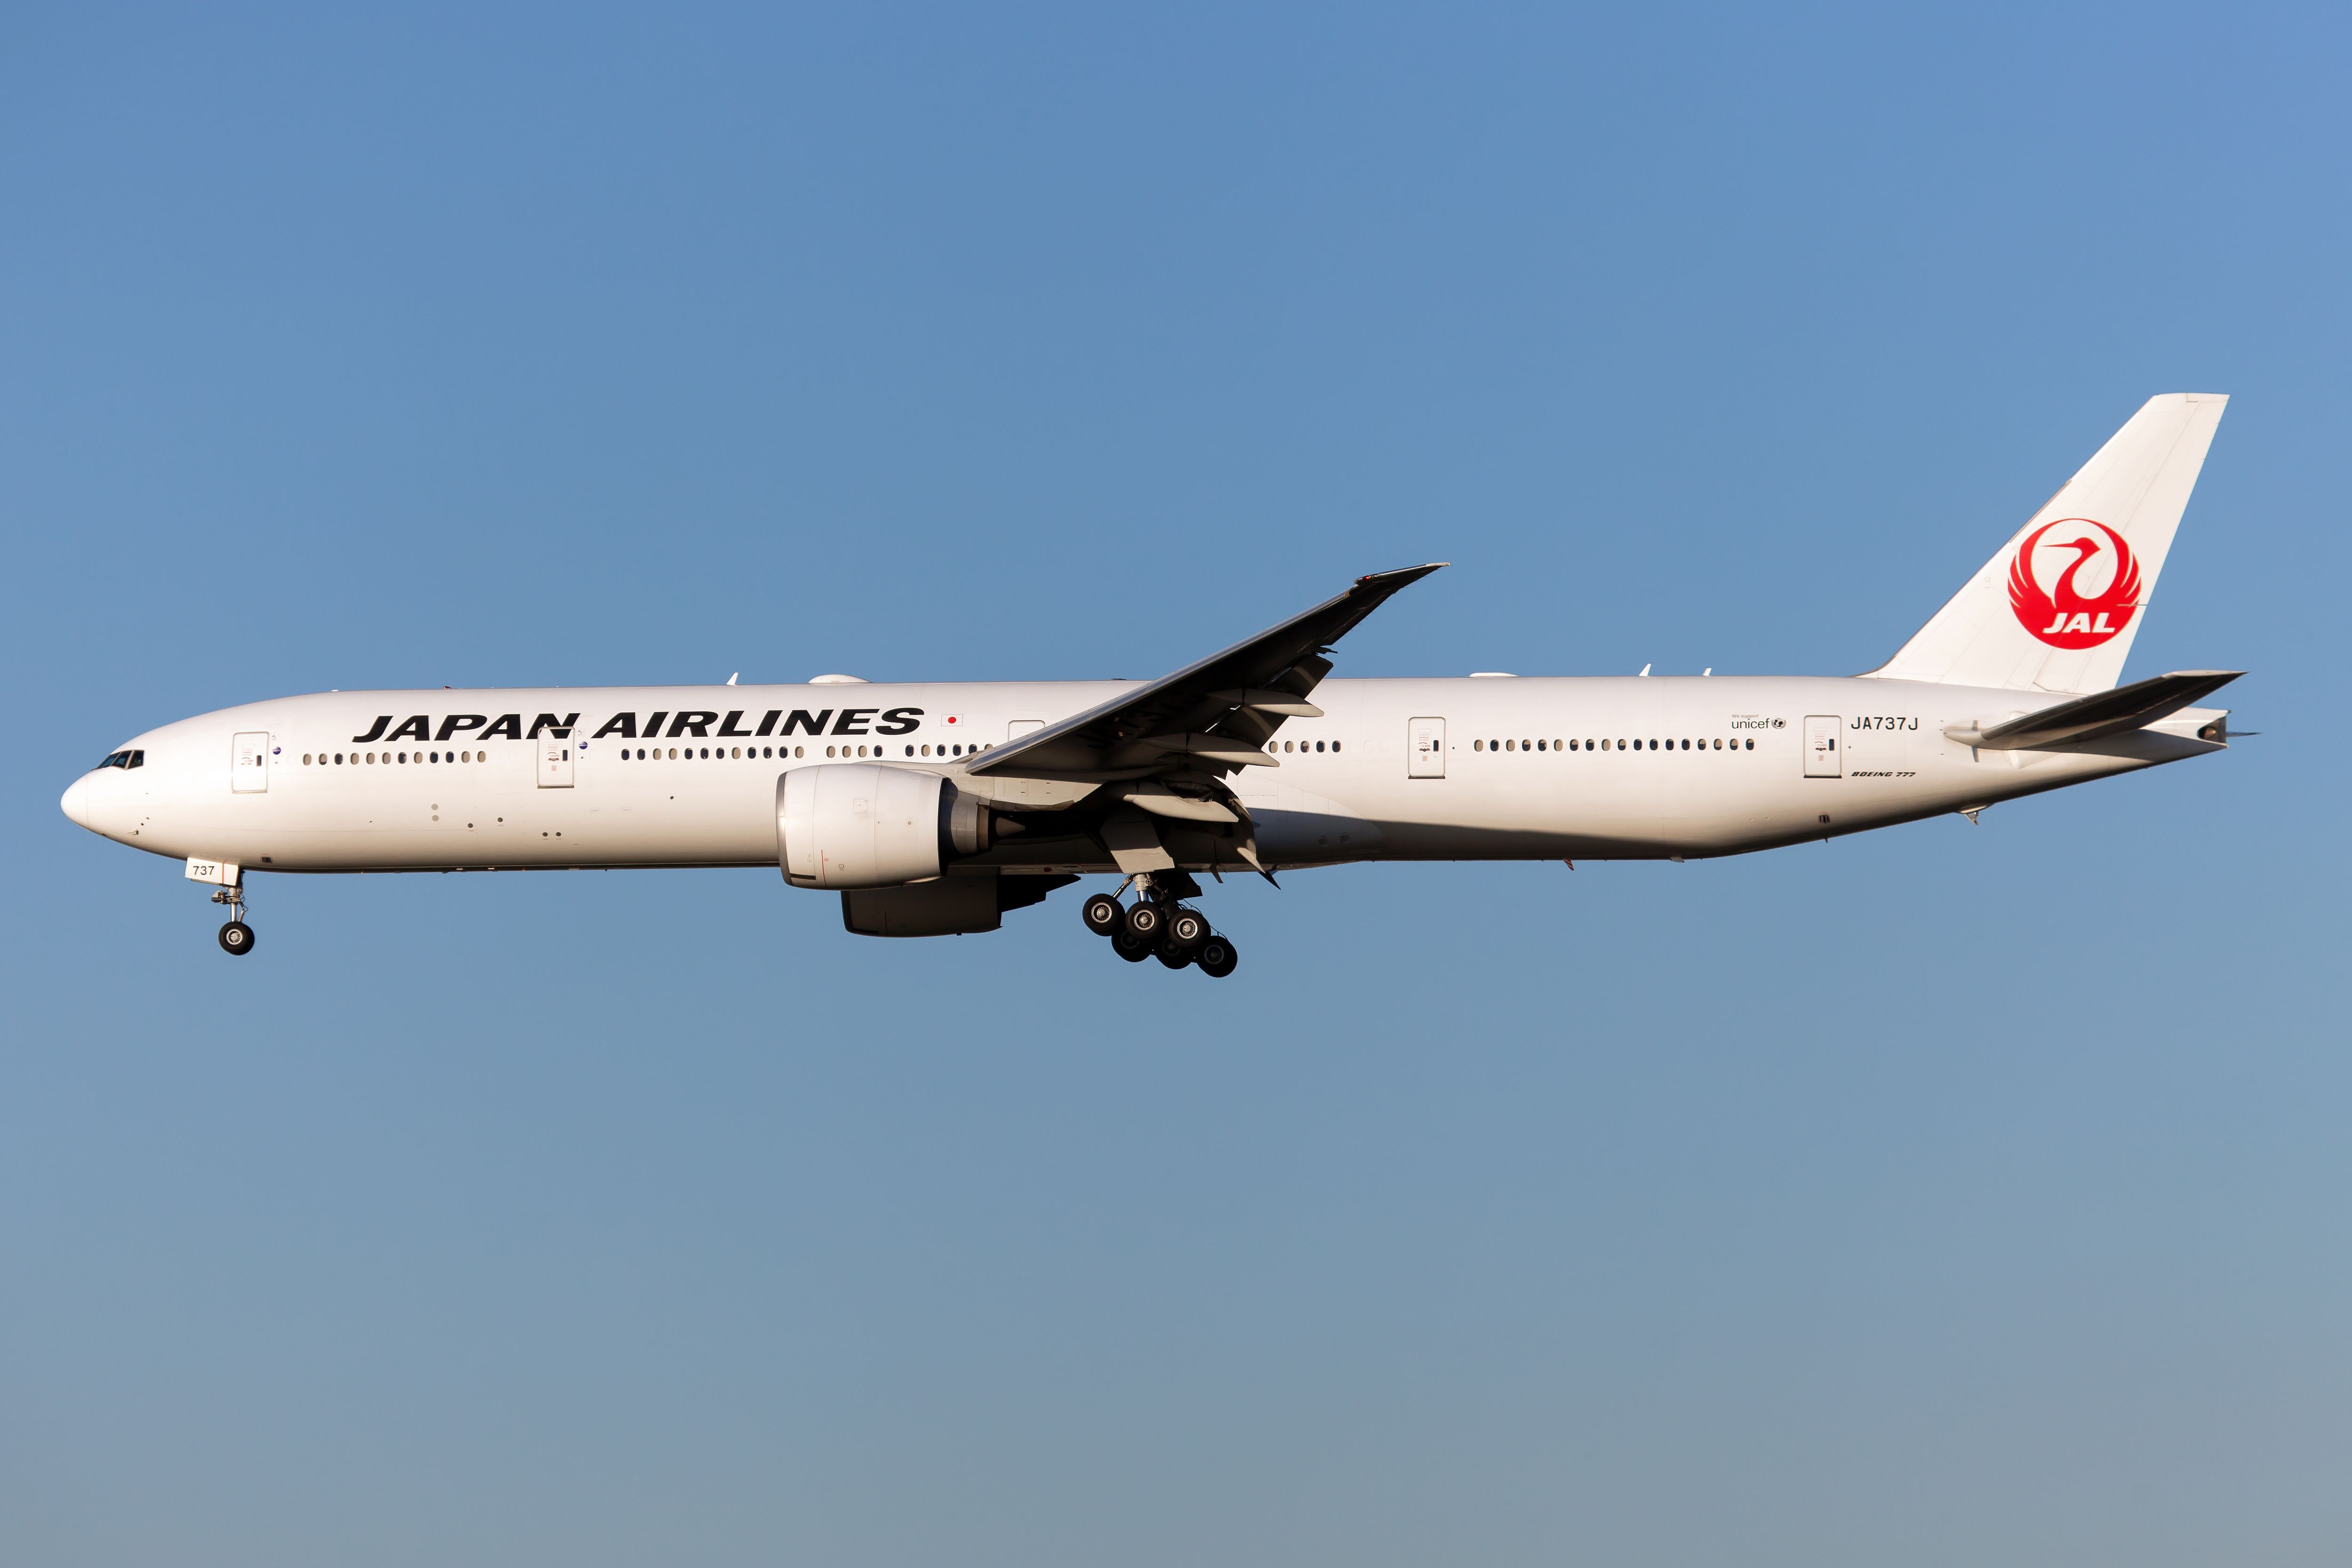 Japan Airlines widebody aircraft against blue sky 